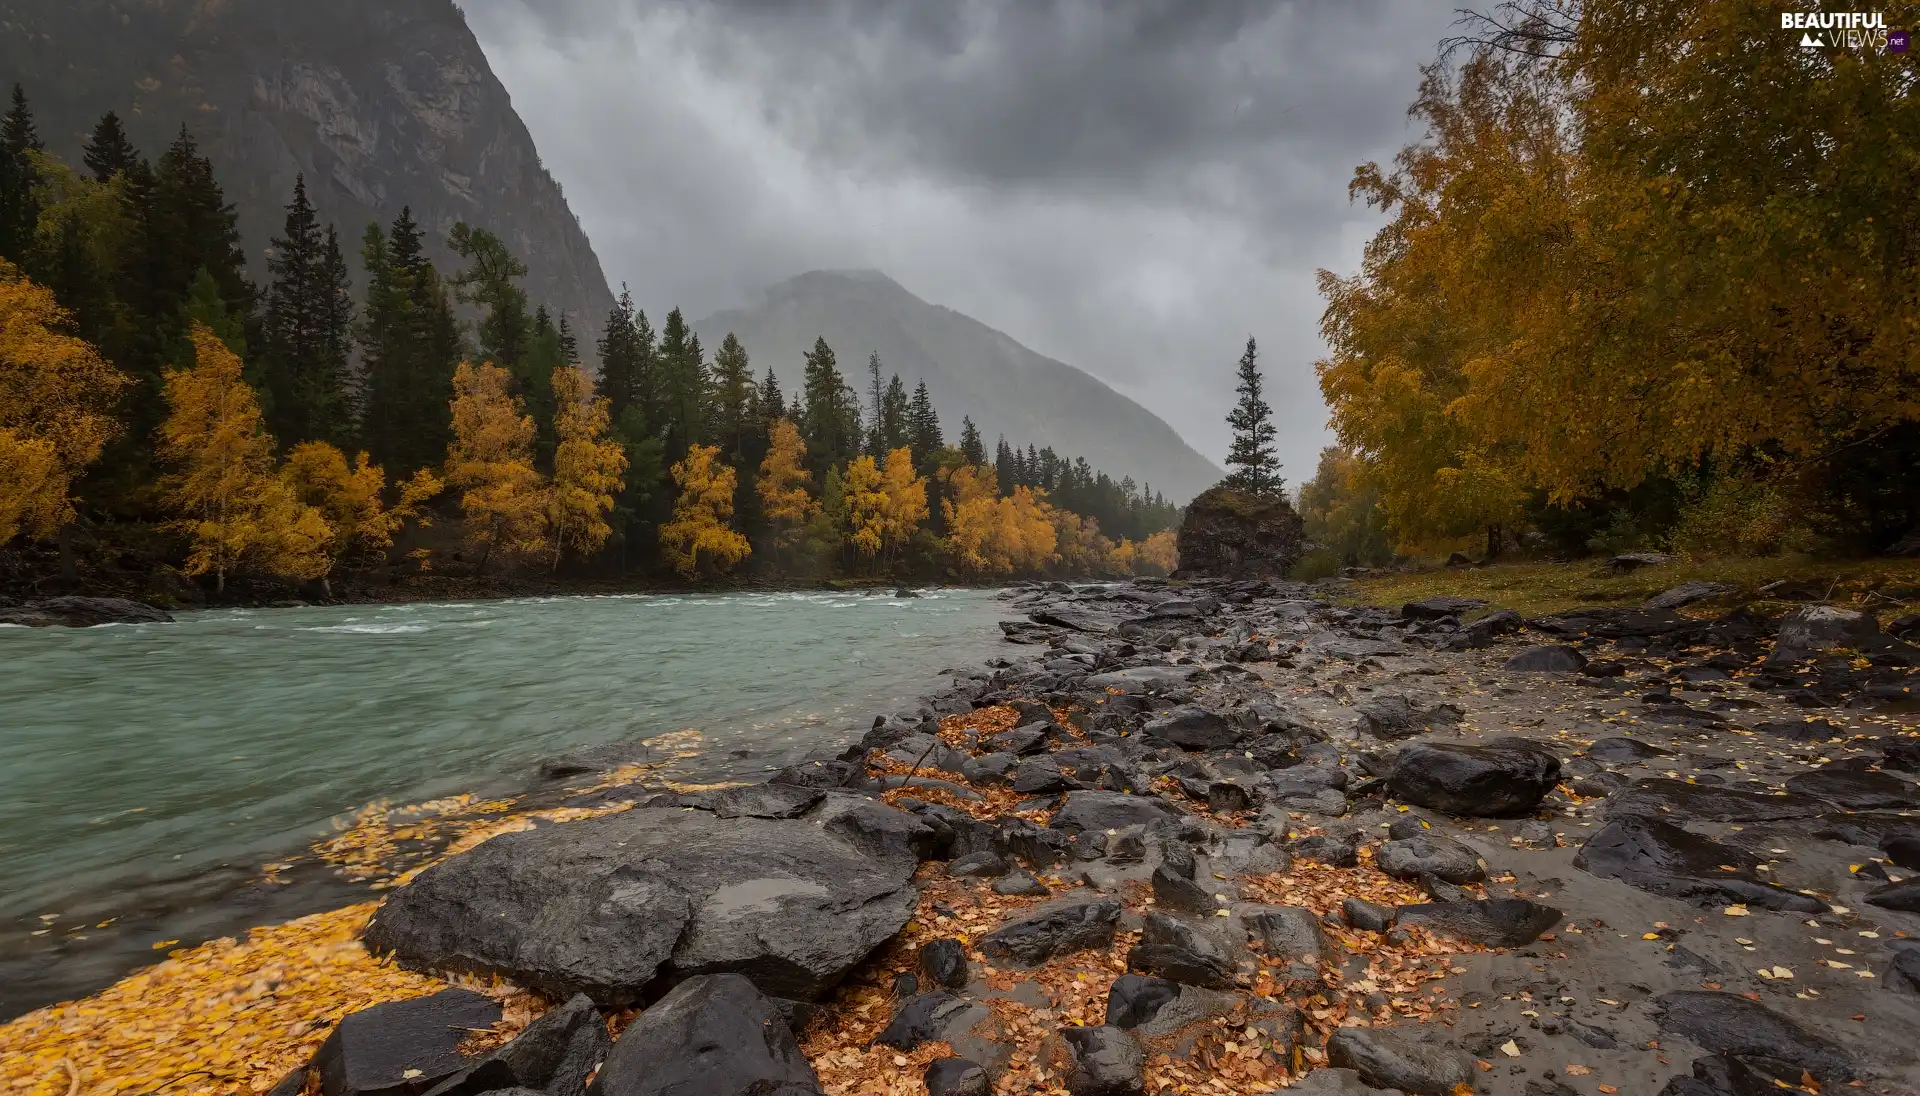 trees, River, fallen, Stones, Mountains, viewes, Leaf